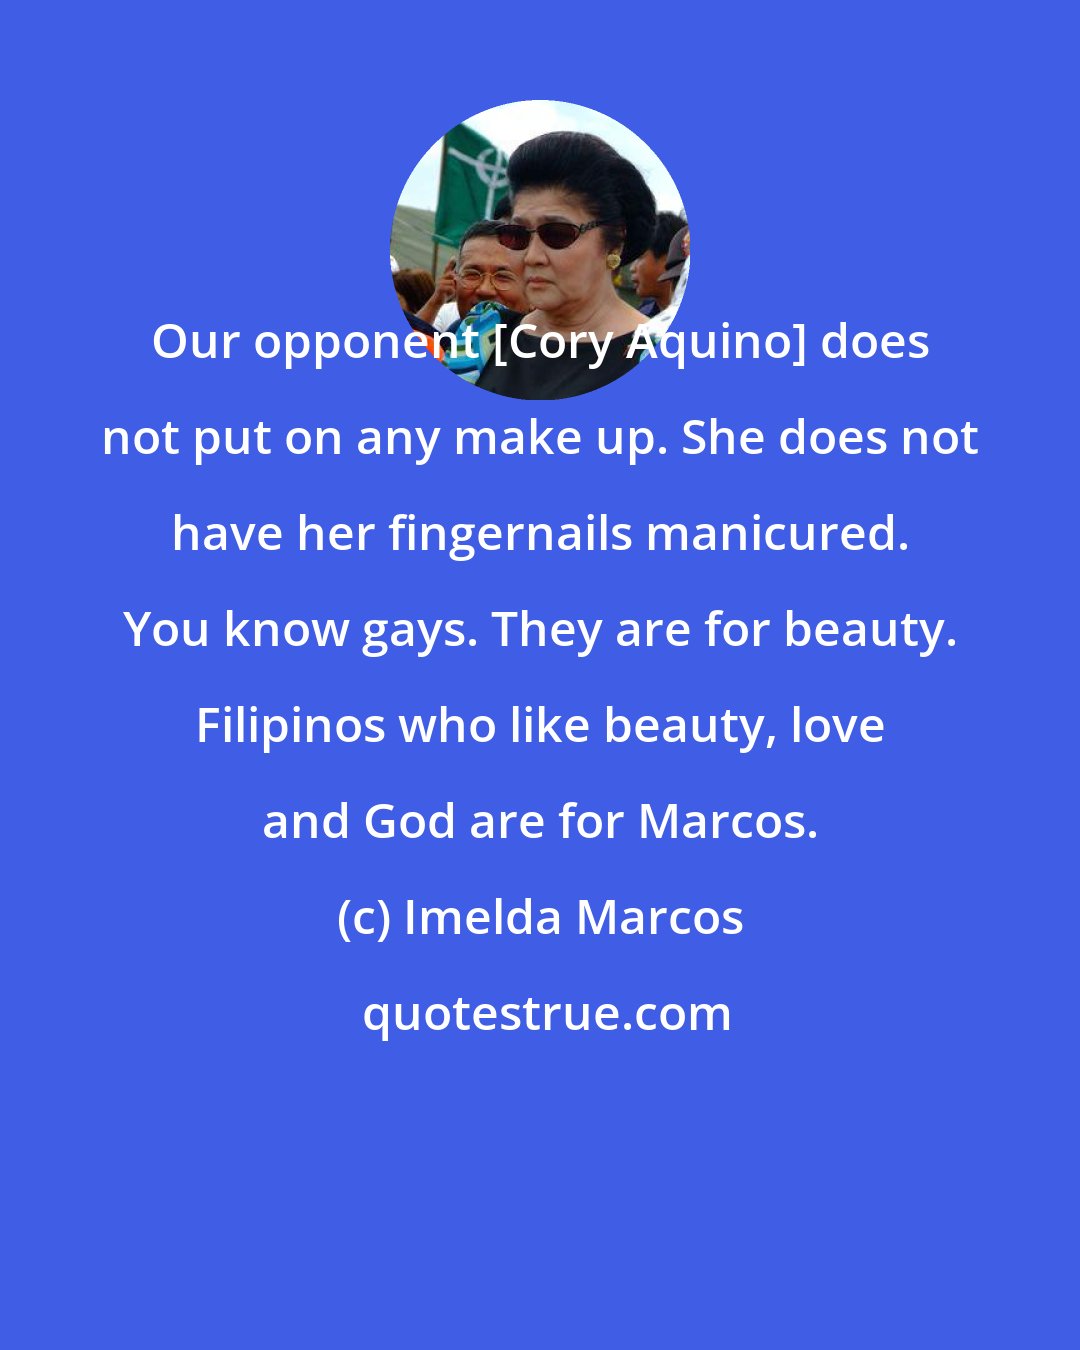 Imelda Marcos: Our opponent [Cory Aquino] does not put on any make up. She does not have her fingernails manicured. You know gays. They are for beauty. Filipinos who like beauty, love and God are for Marcos.